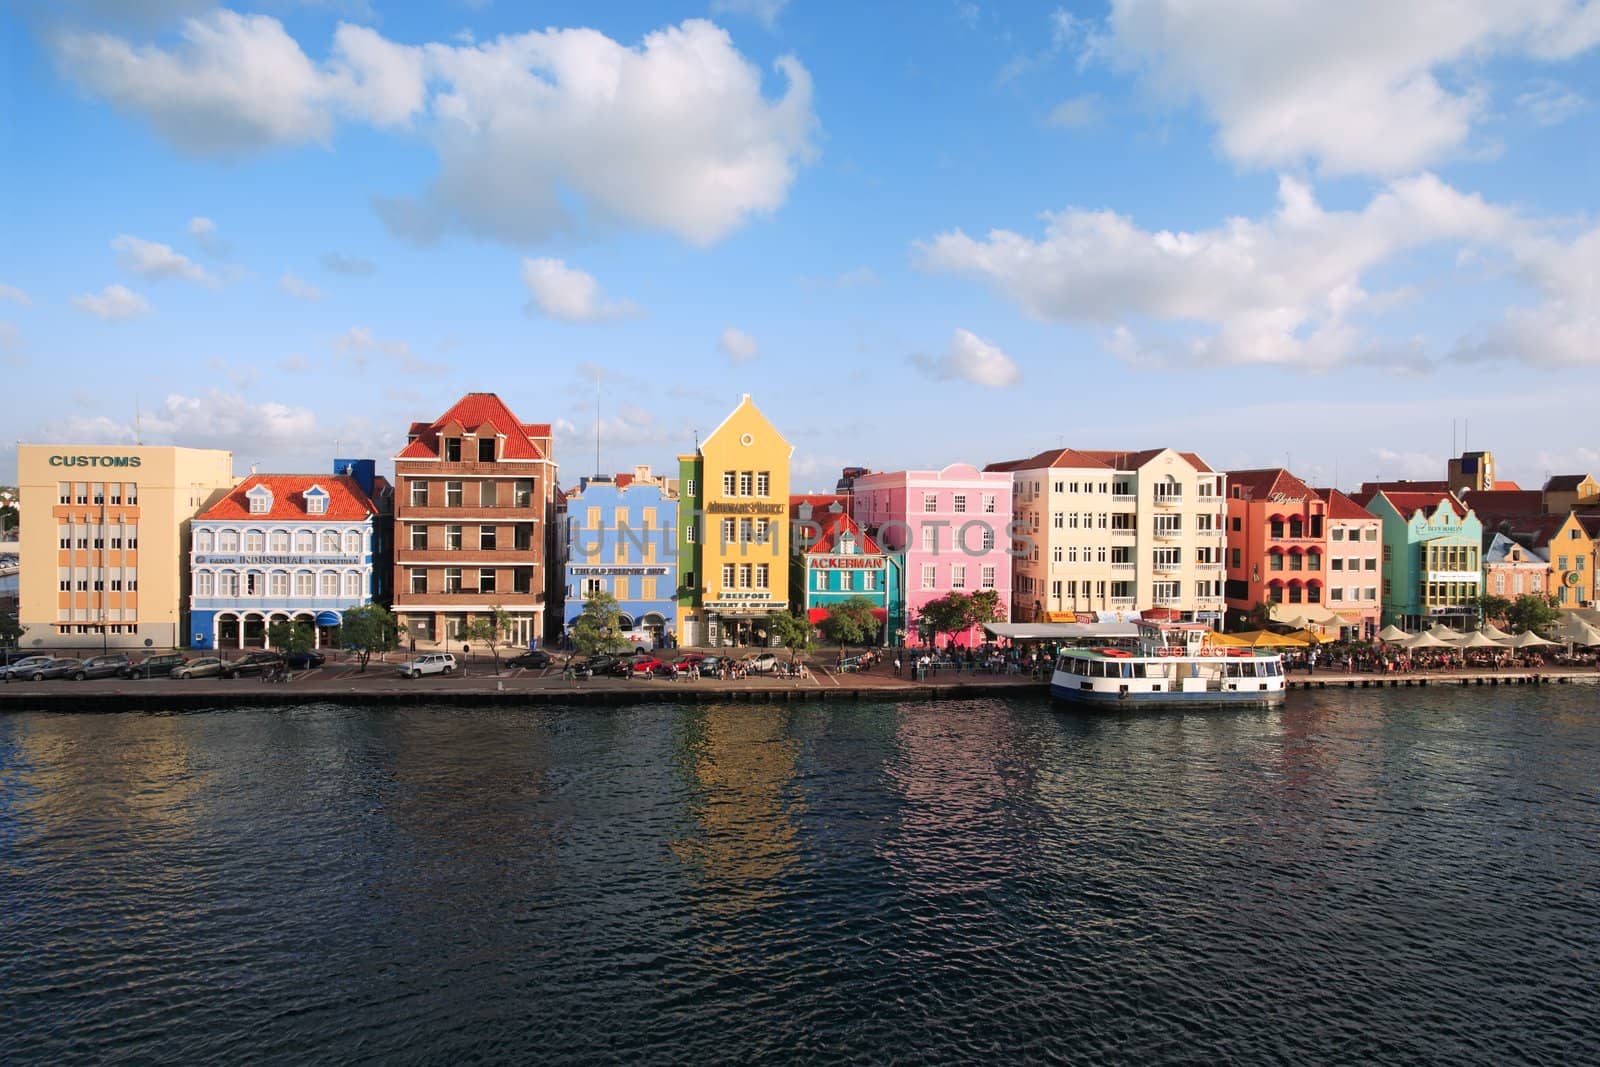 Punda, Willemstad, Curacao by sumners